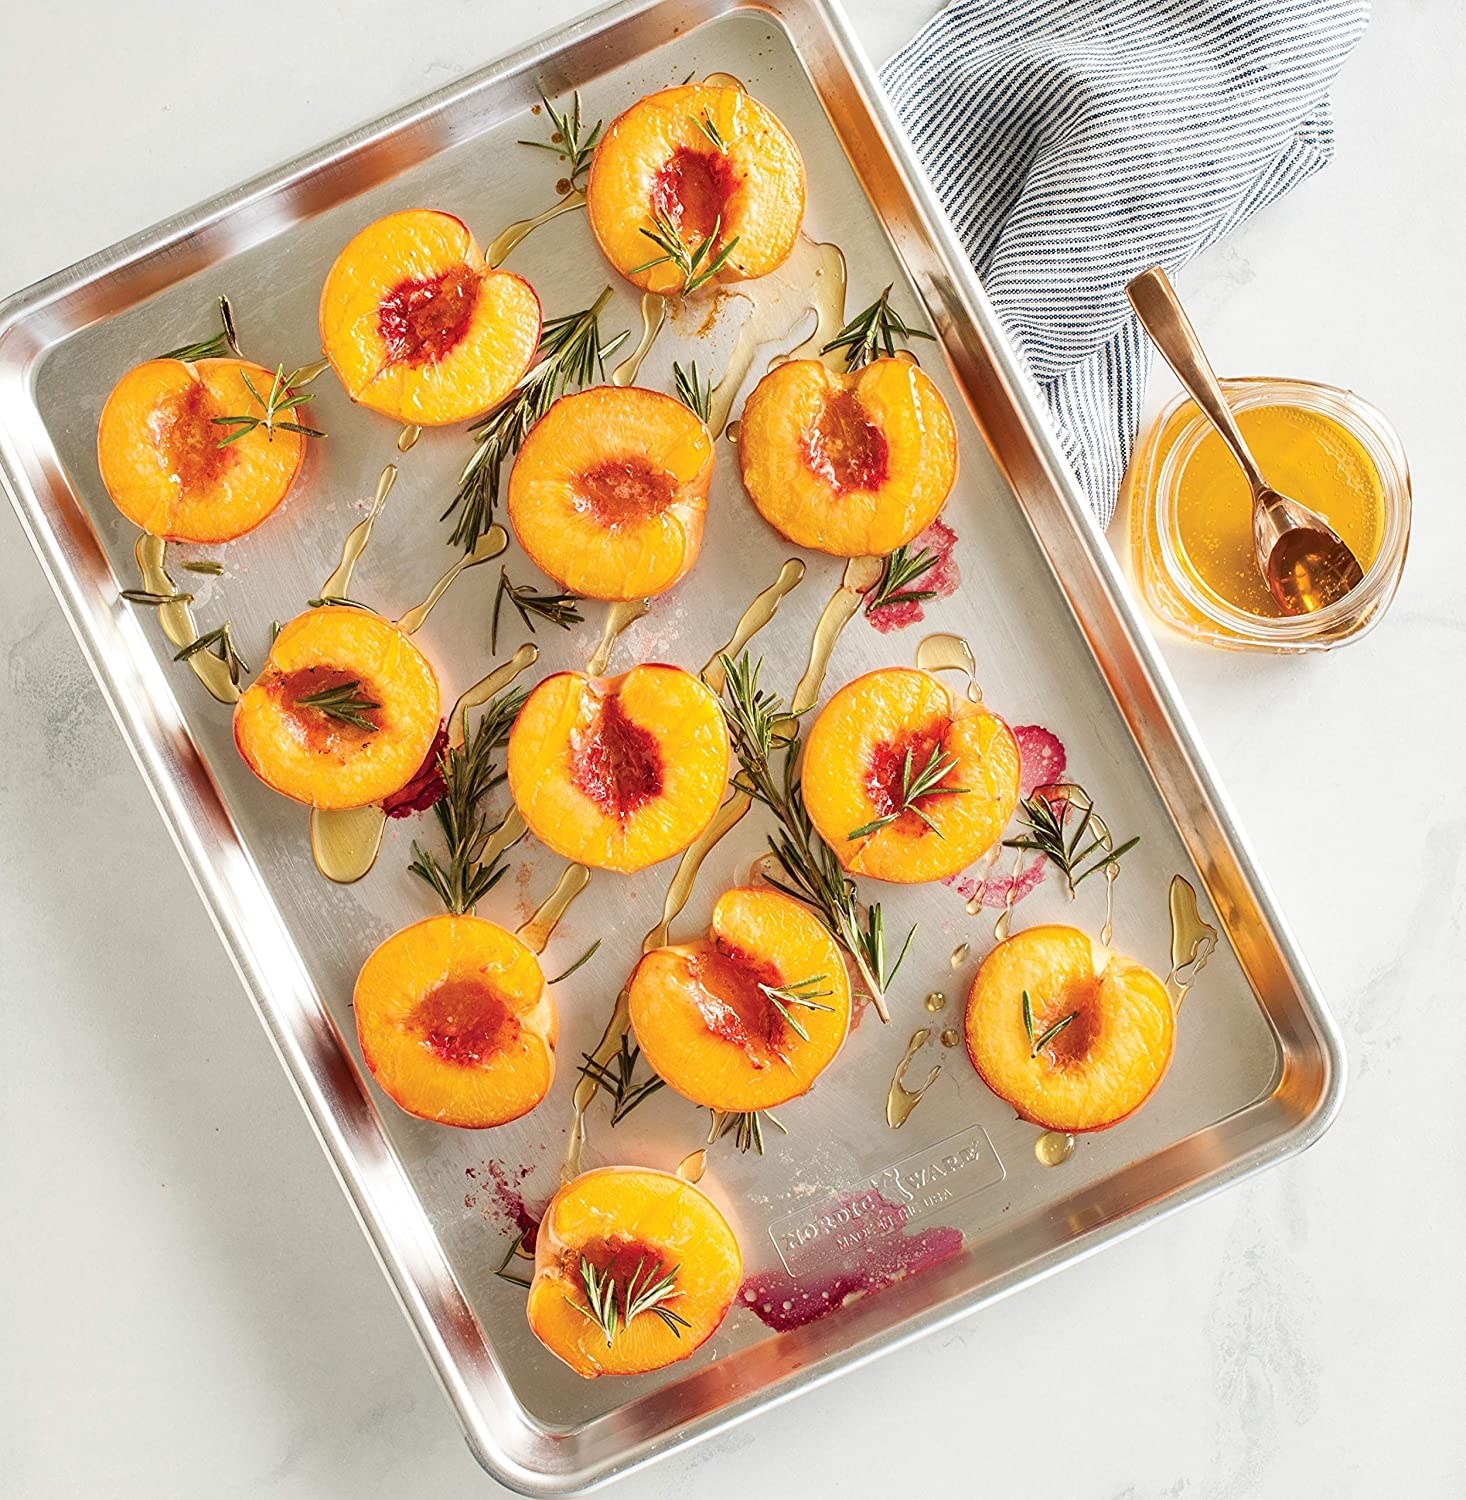 Halved peaches and rosemary sprigs on the sheet tray